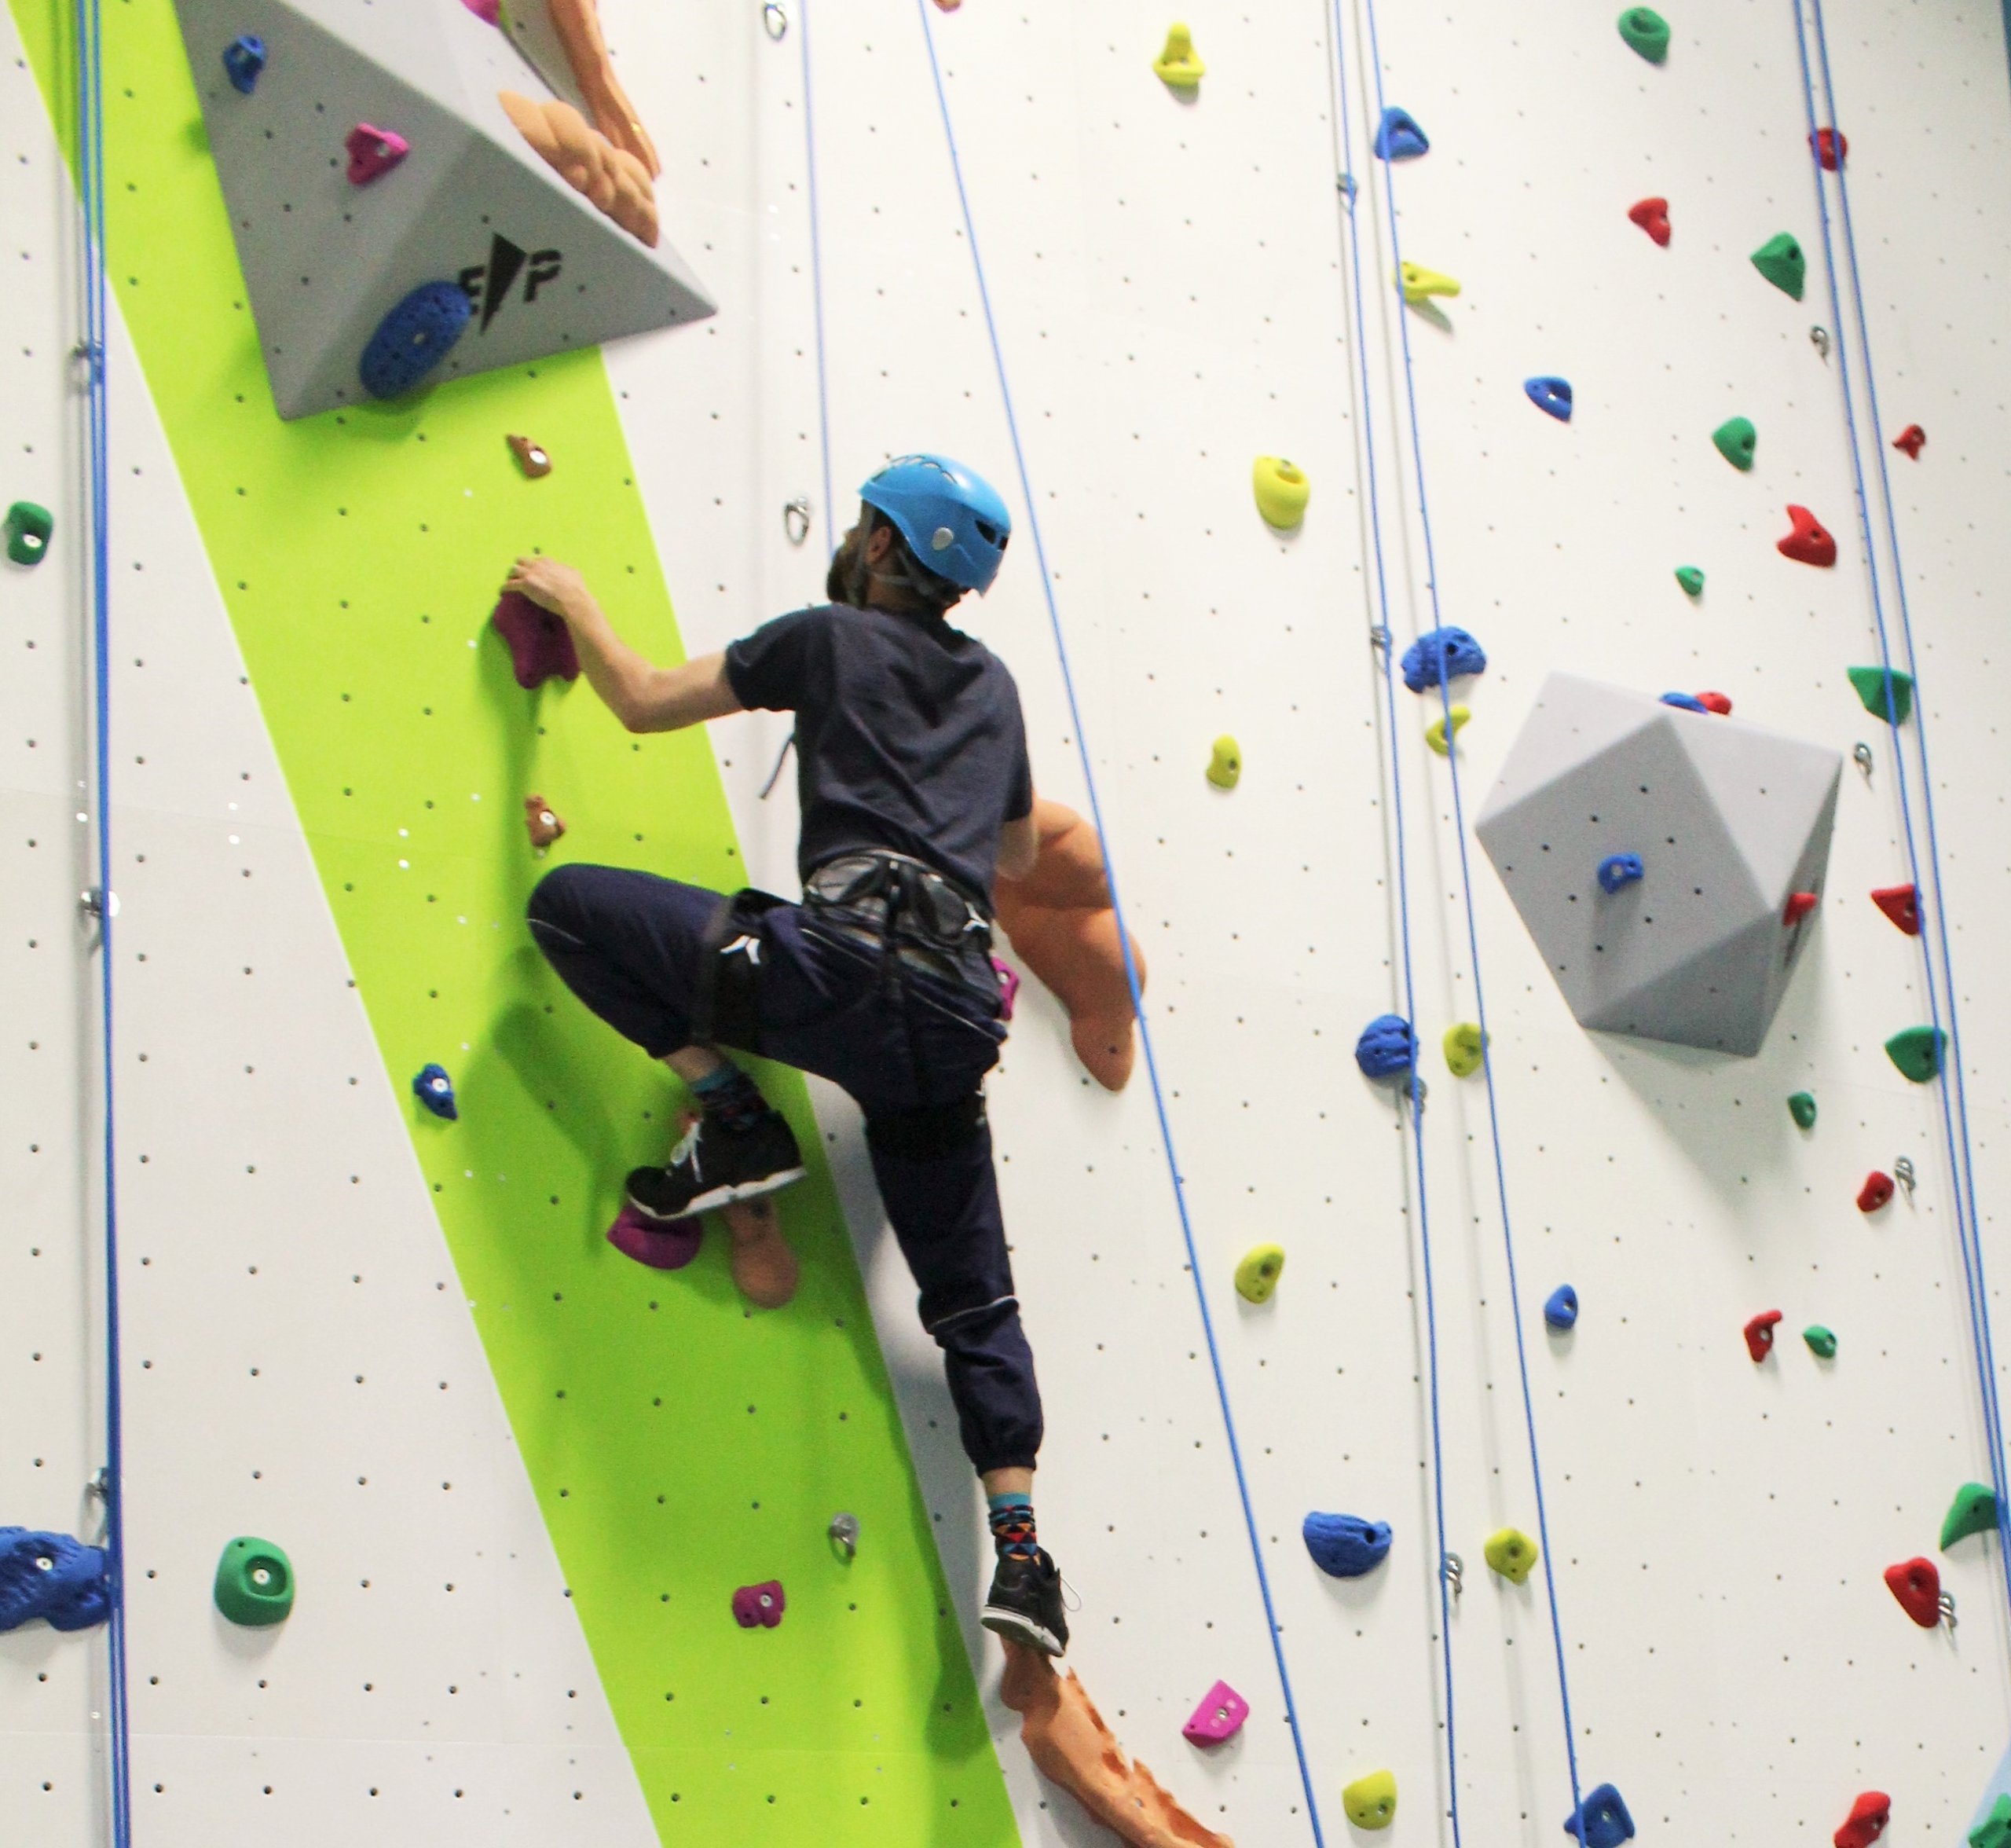 West-Wight-Climbing-Wall-7-2